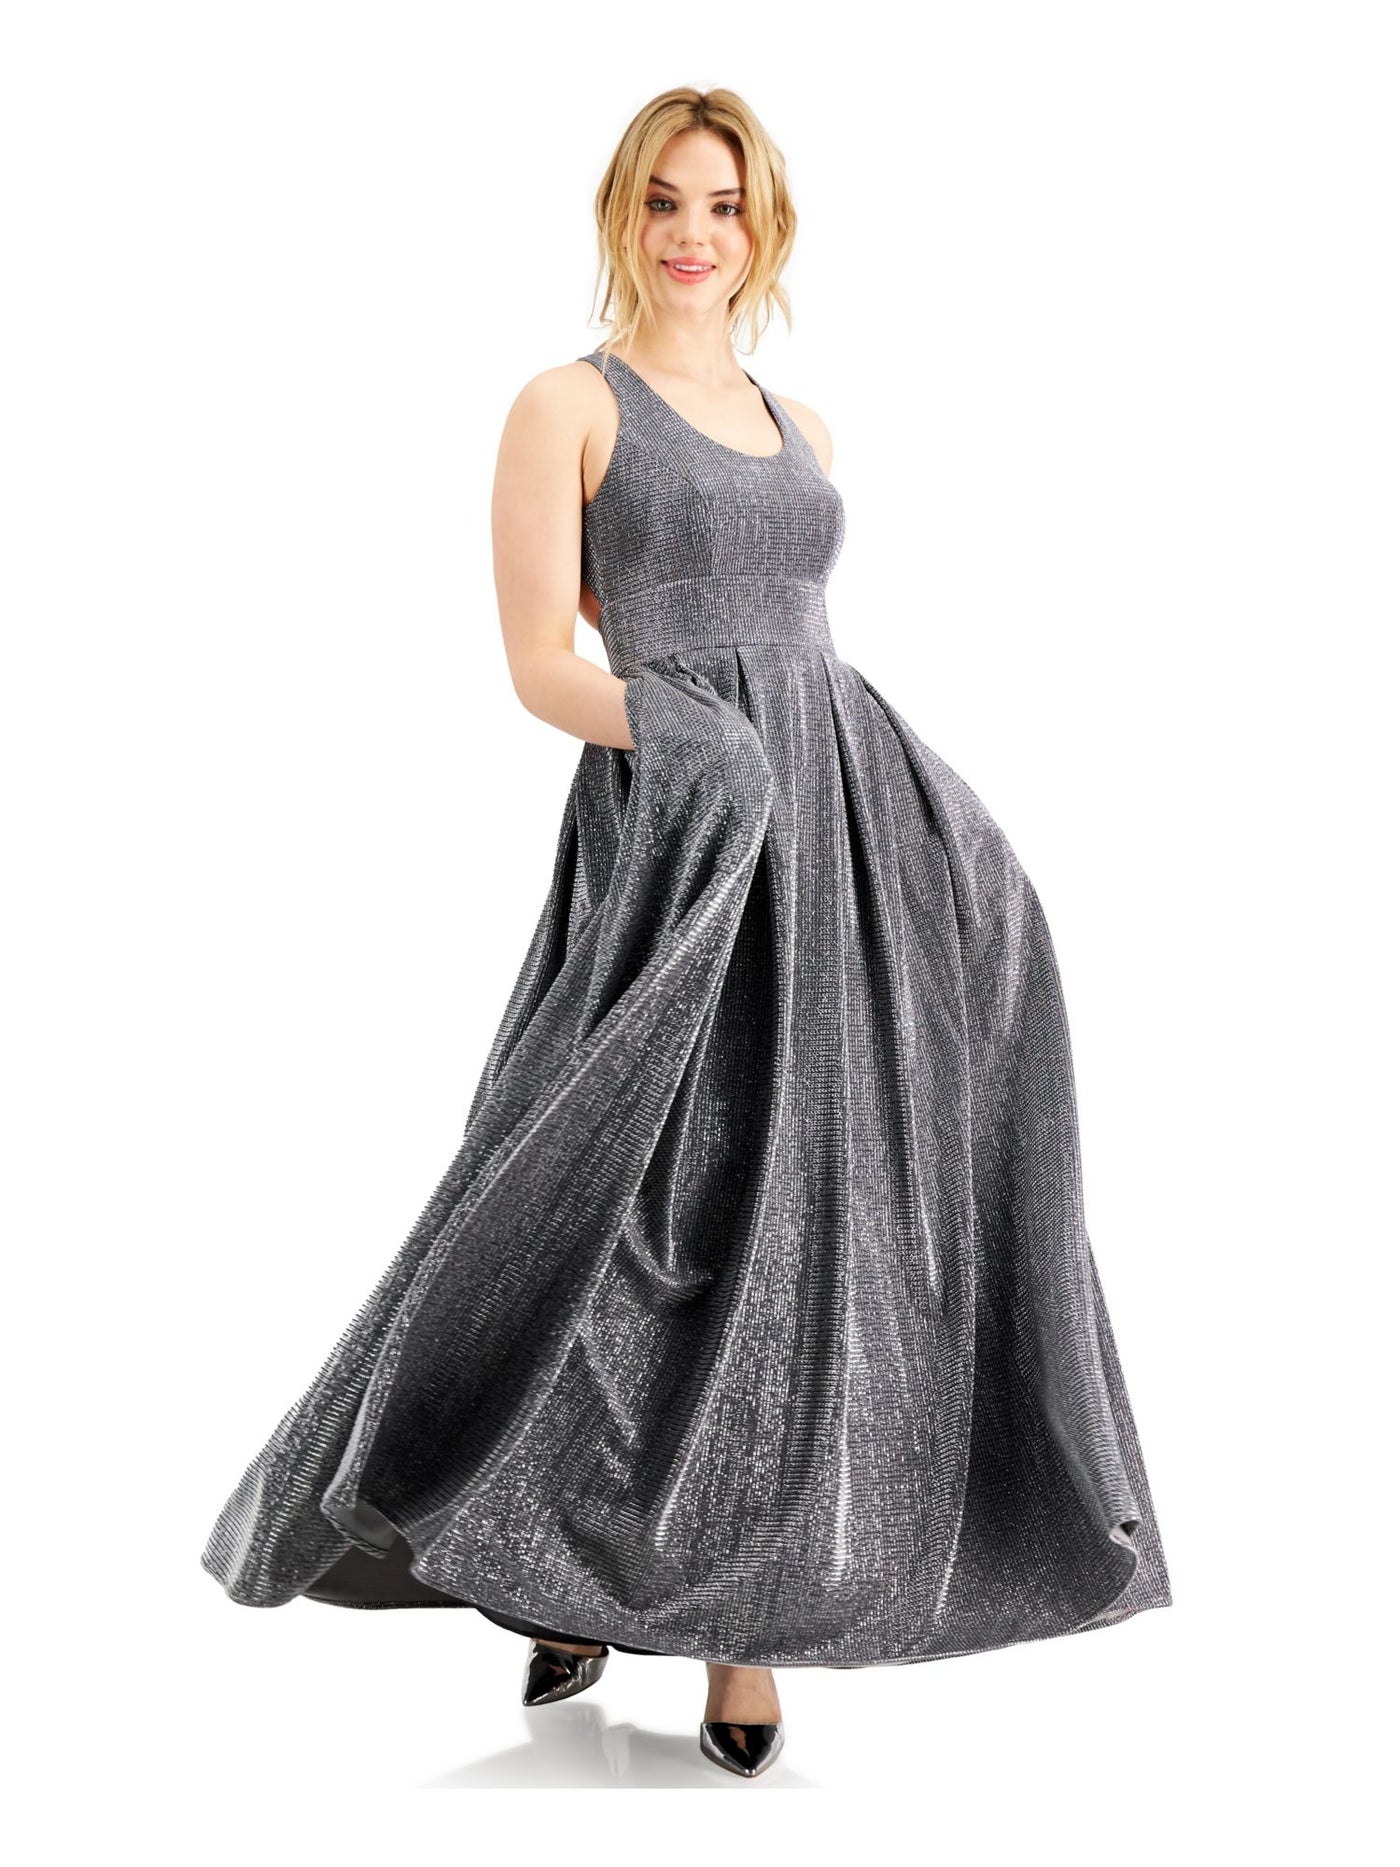 MORGAN & CO Womens Silver Glitter Pleated Gown Sleeveless Scoop Neck Full-Length Formal Fit + Flare Dress Juniors 1